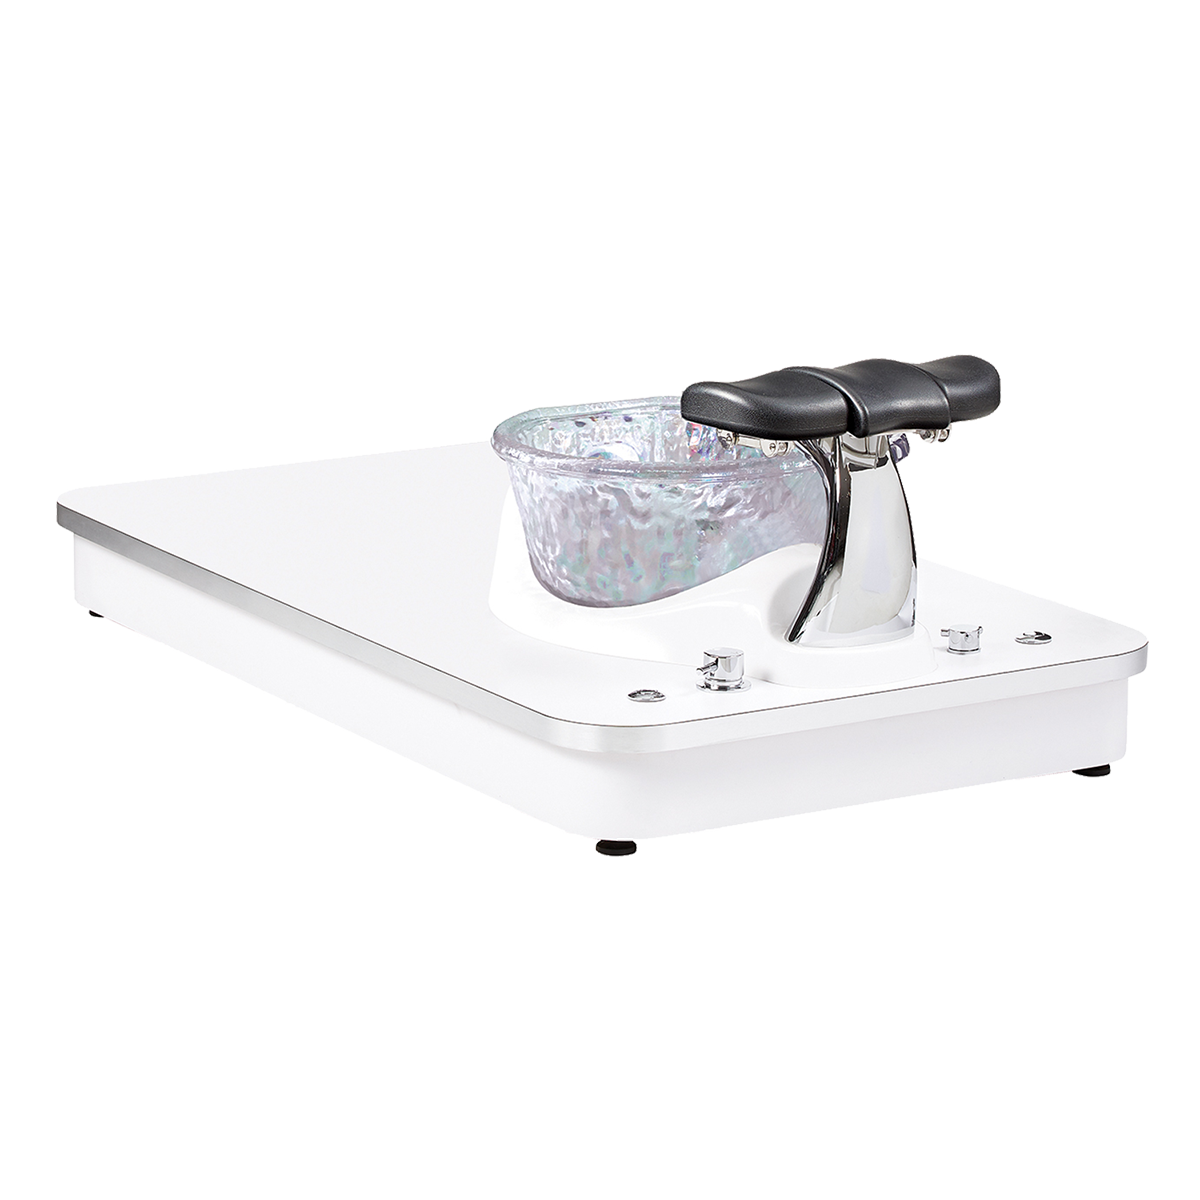 Whale Spa White Freeform Platform Only for Felicity Freeform Pedicure Chair | Pedicure Chairs for Nail Salon and Spa